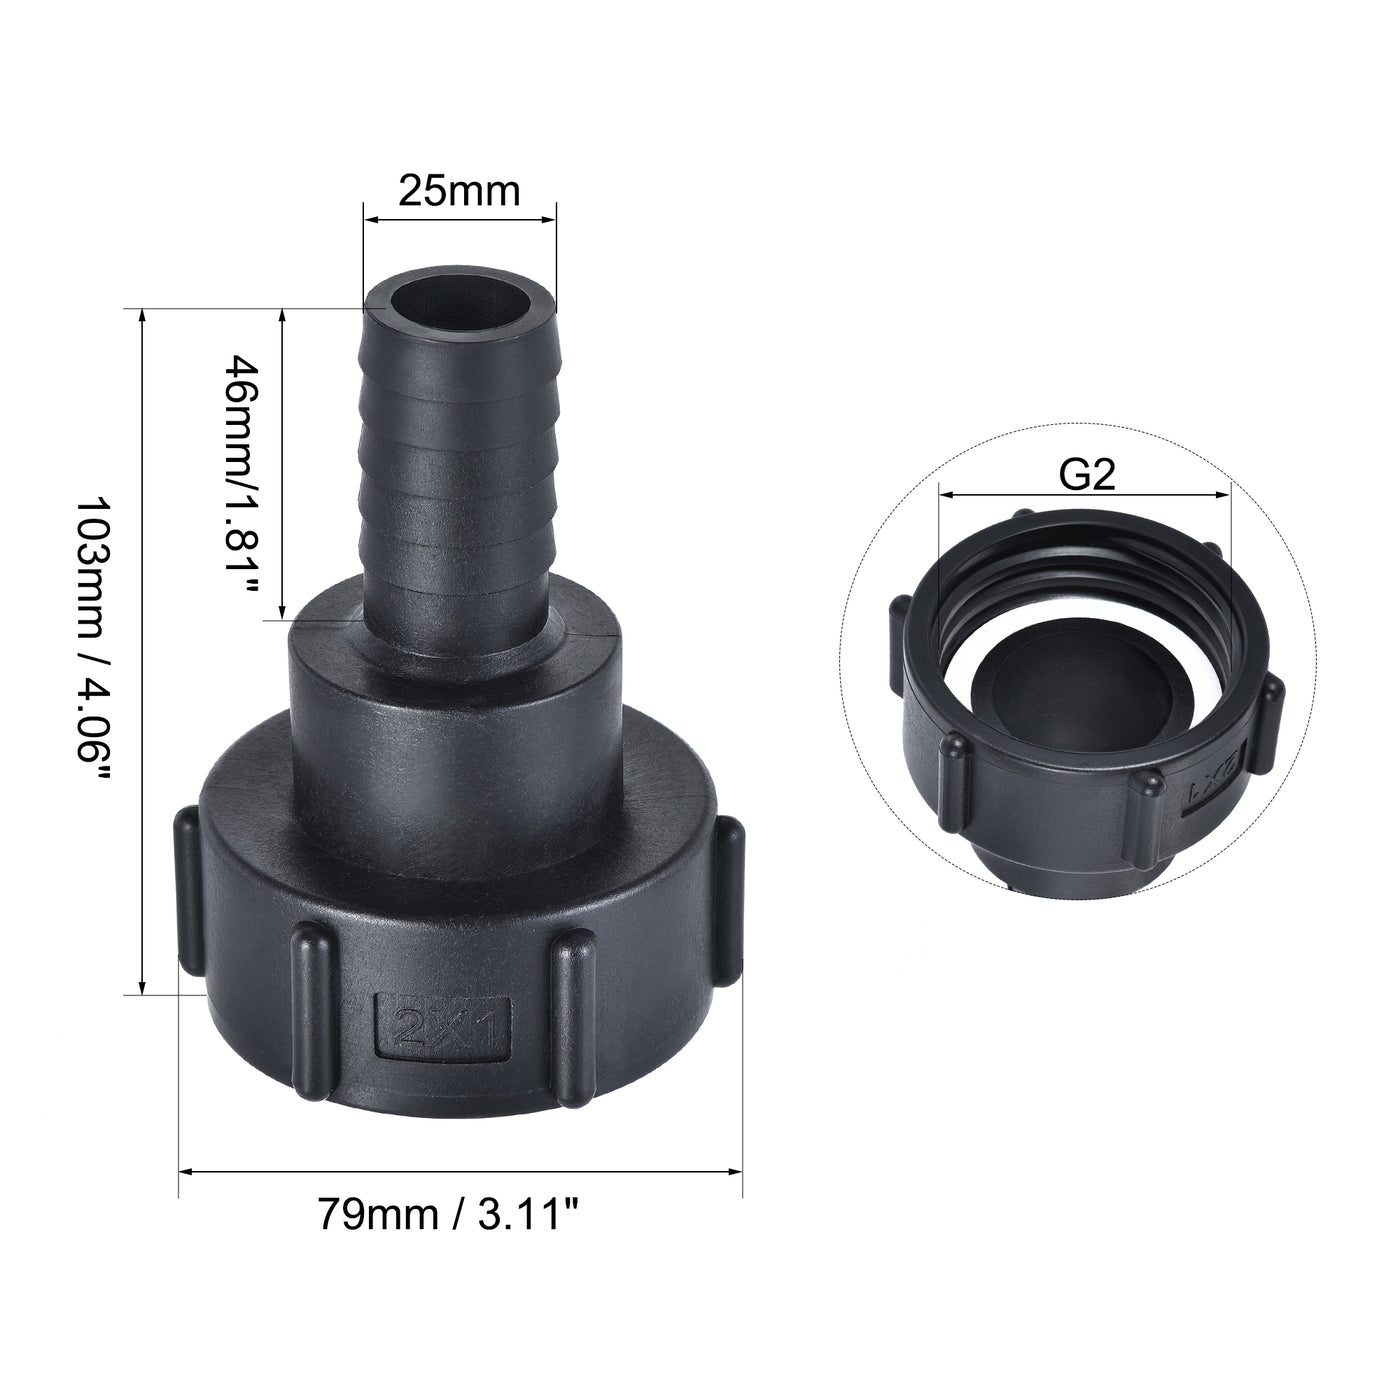 uxcell Uxcell ABS Hose Barb Fitting Coupler with Sealing Ring, mm Barb x G Female Thread Pipe Adapter, Black